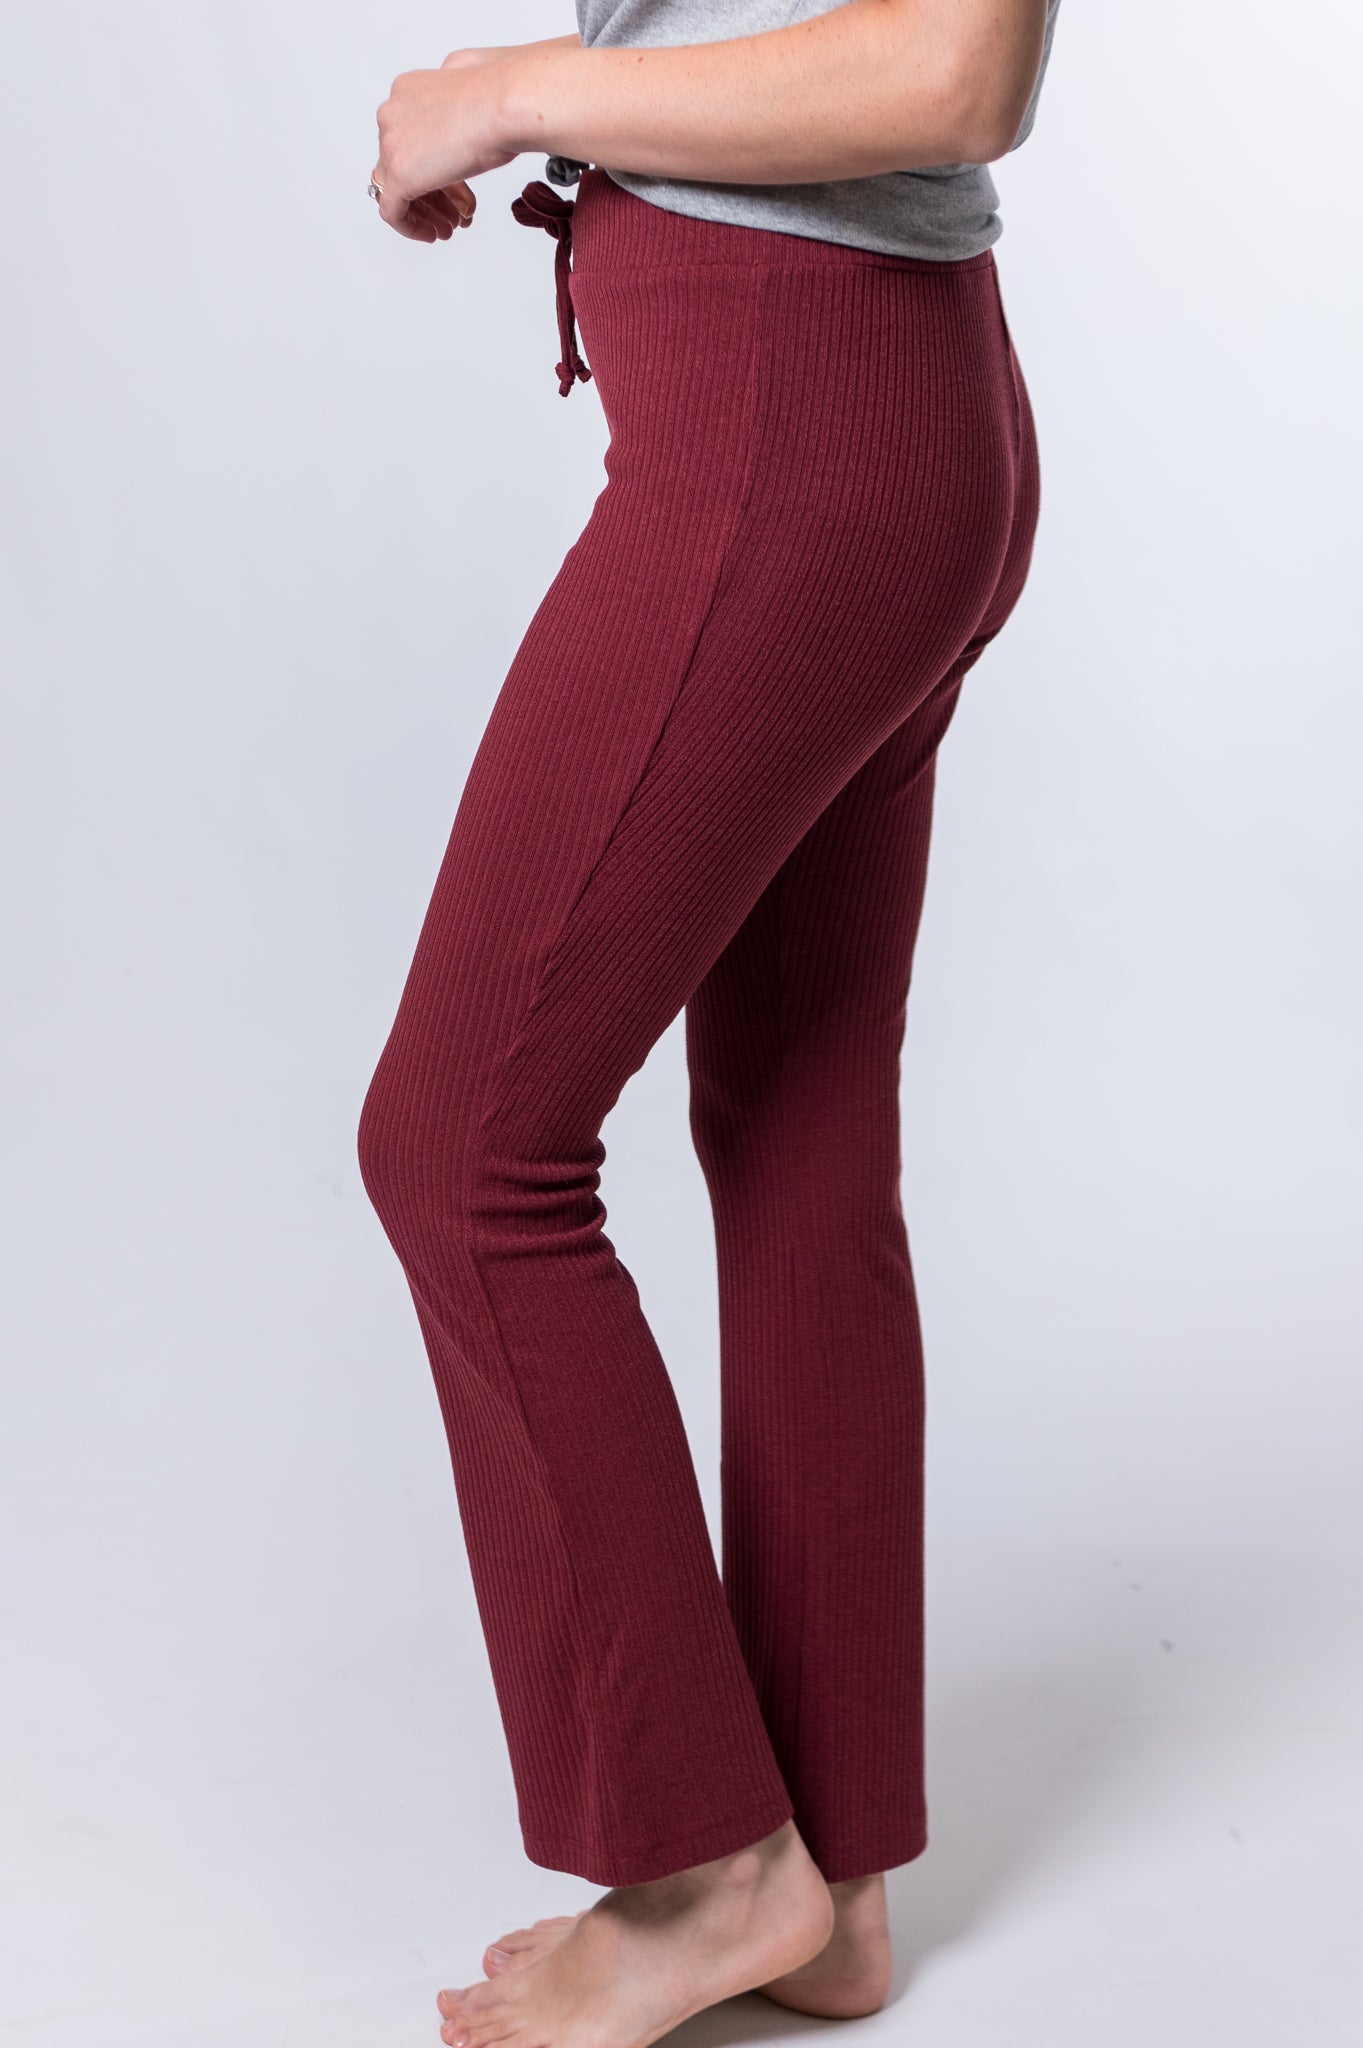 Woman wearing maroon drawstring lounge pants and a gray top with knot. Side of clothing is being shown